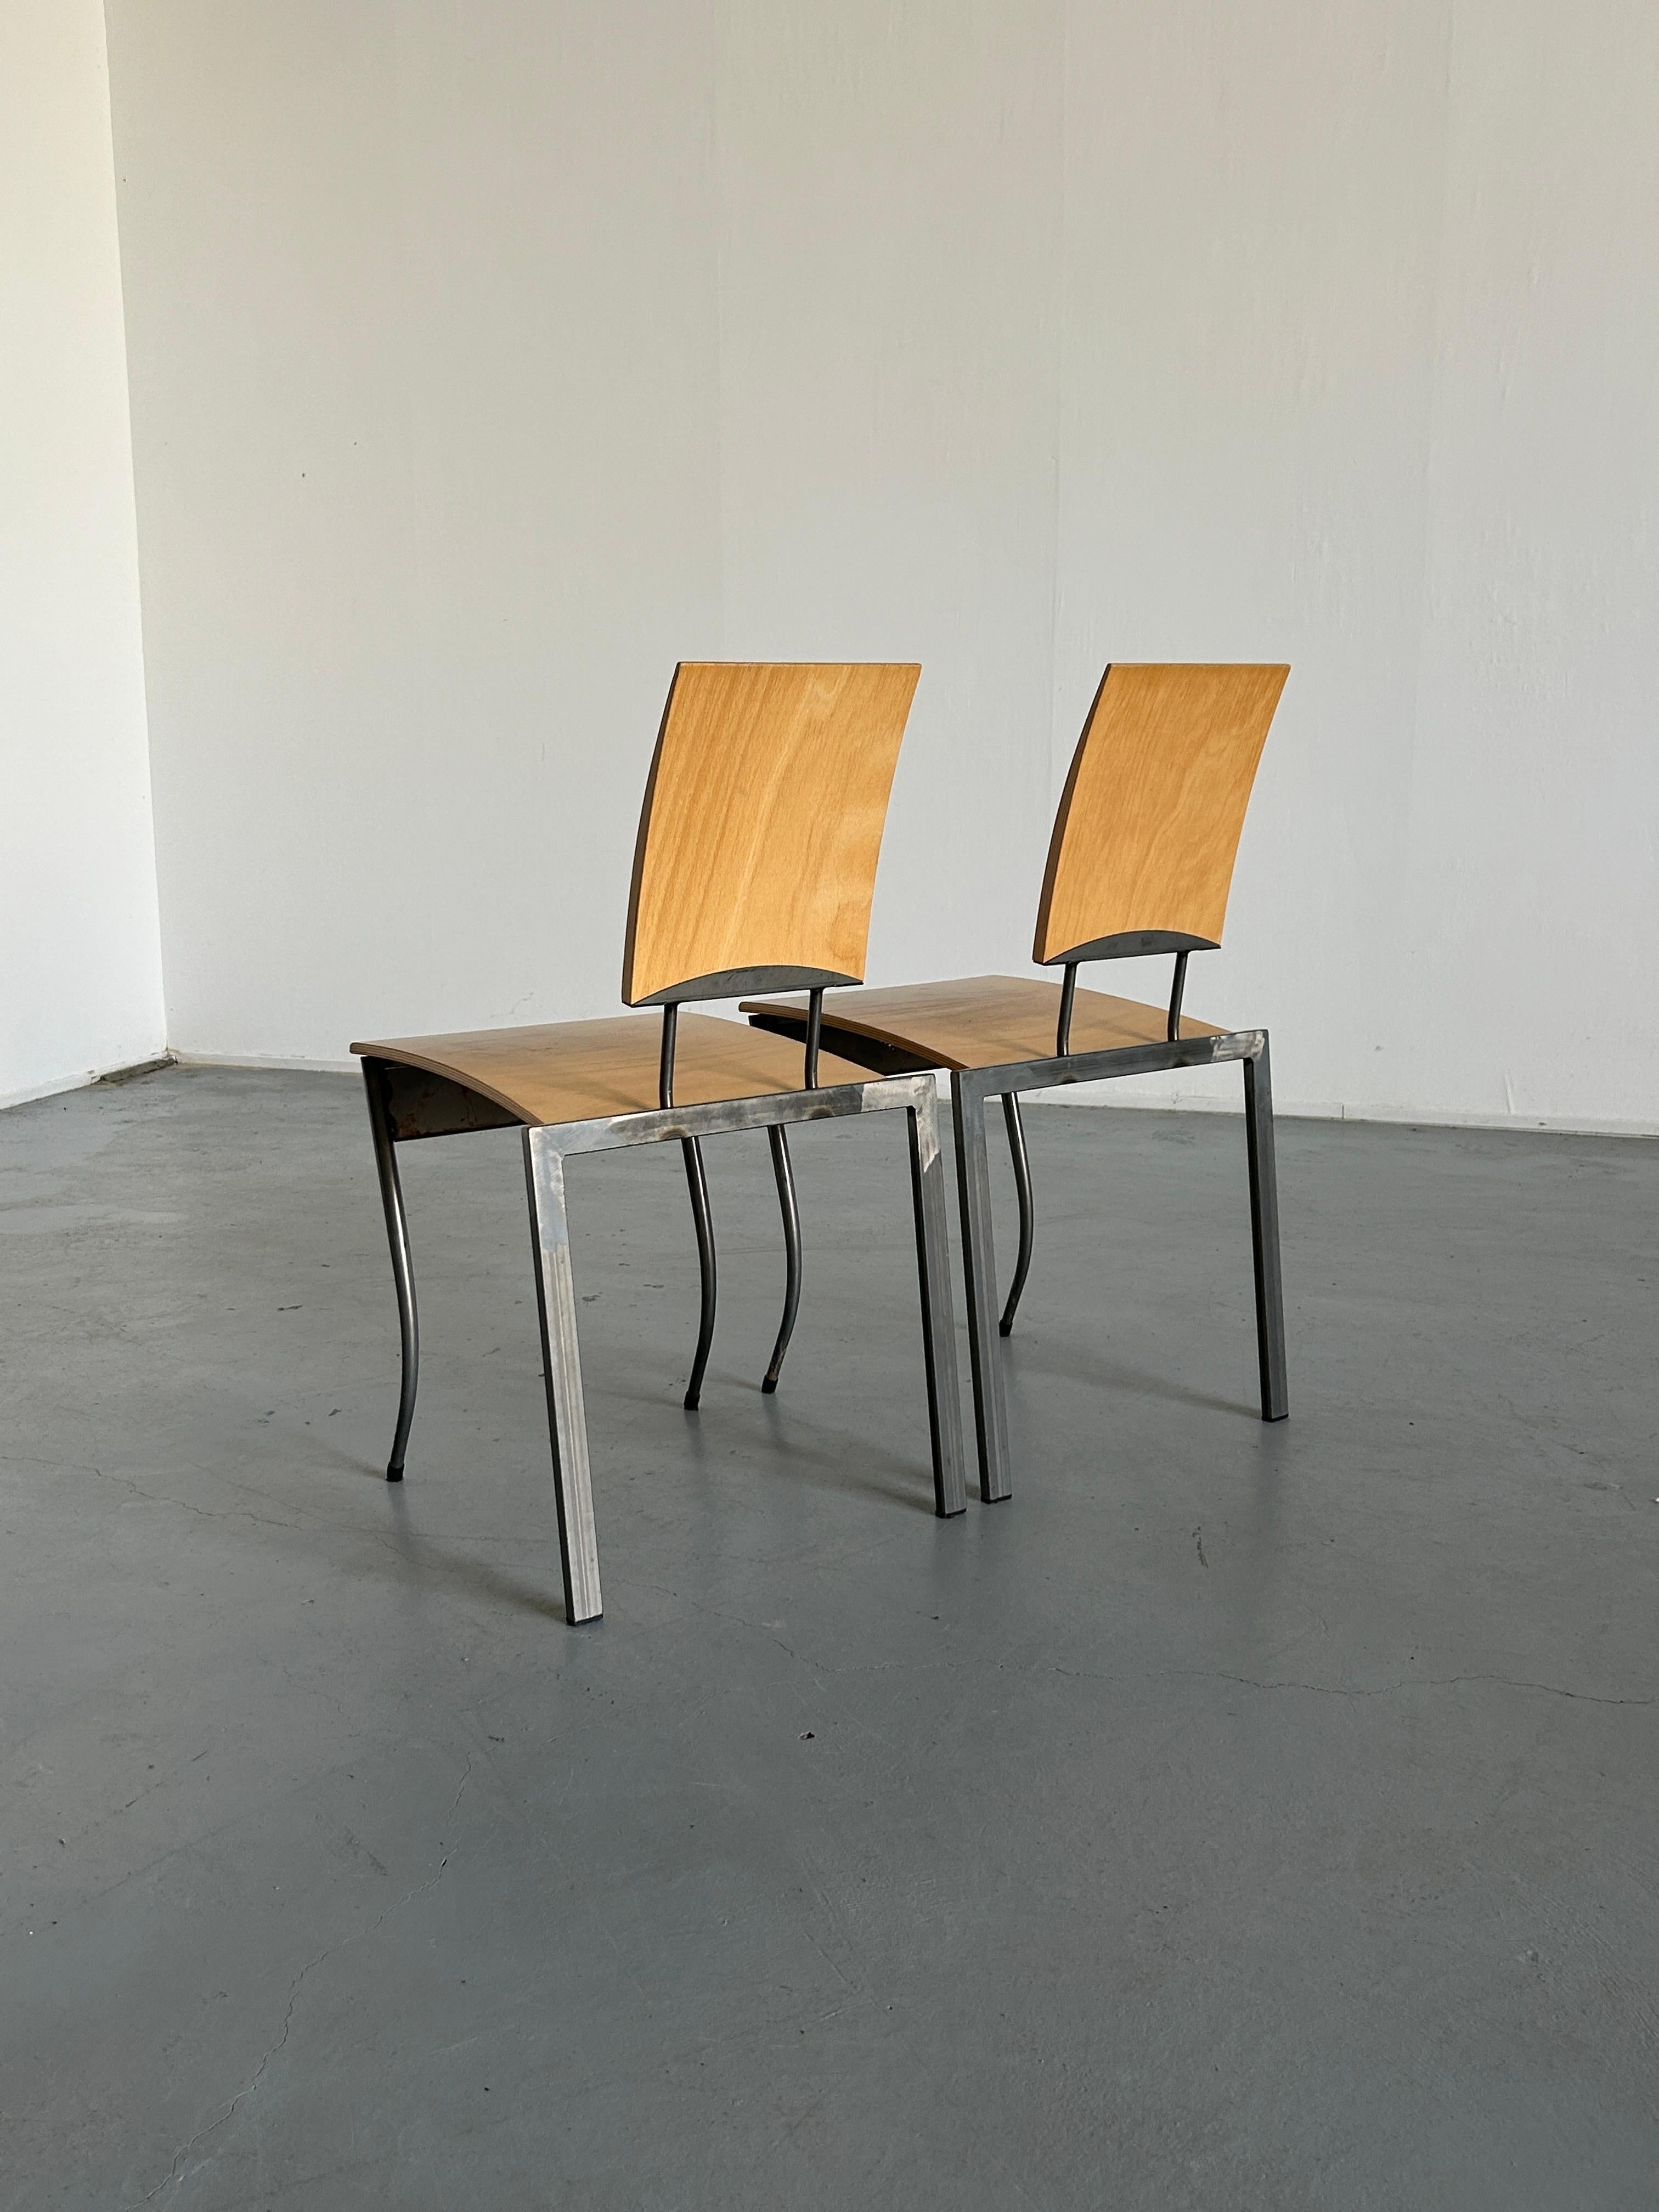 Late 20th Century 1 of 2 Memphis Design Postmodern Chairs by Karl Friedrich Förster for KFF, 1980s